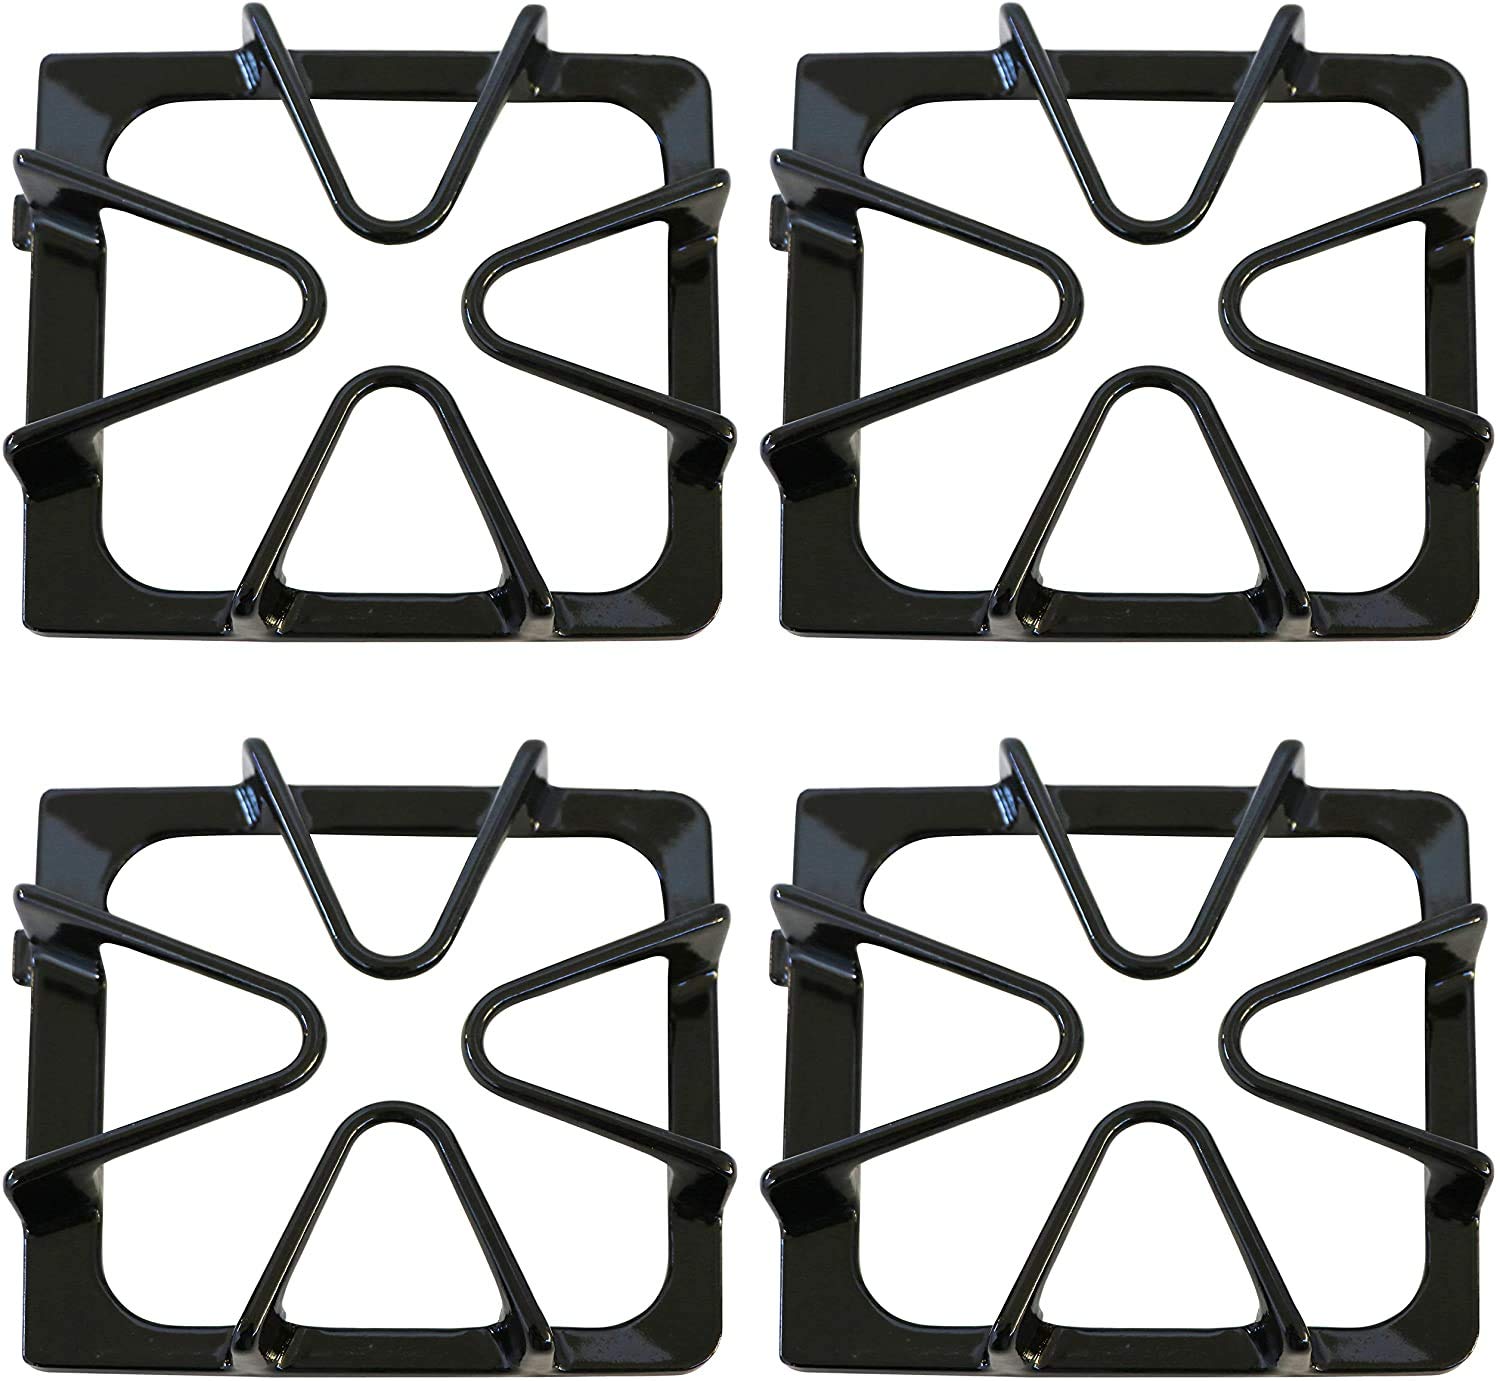 Greatshow 4Pk 8522858 fits for Whirlpool Stove Range Burner grates with